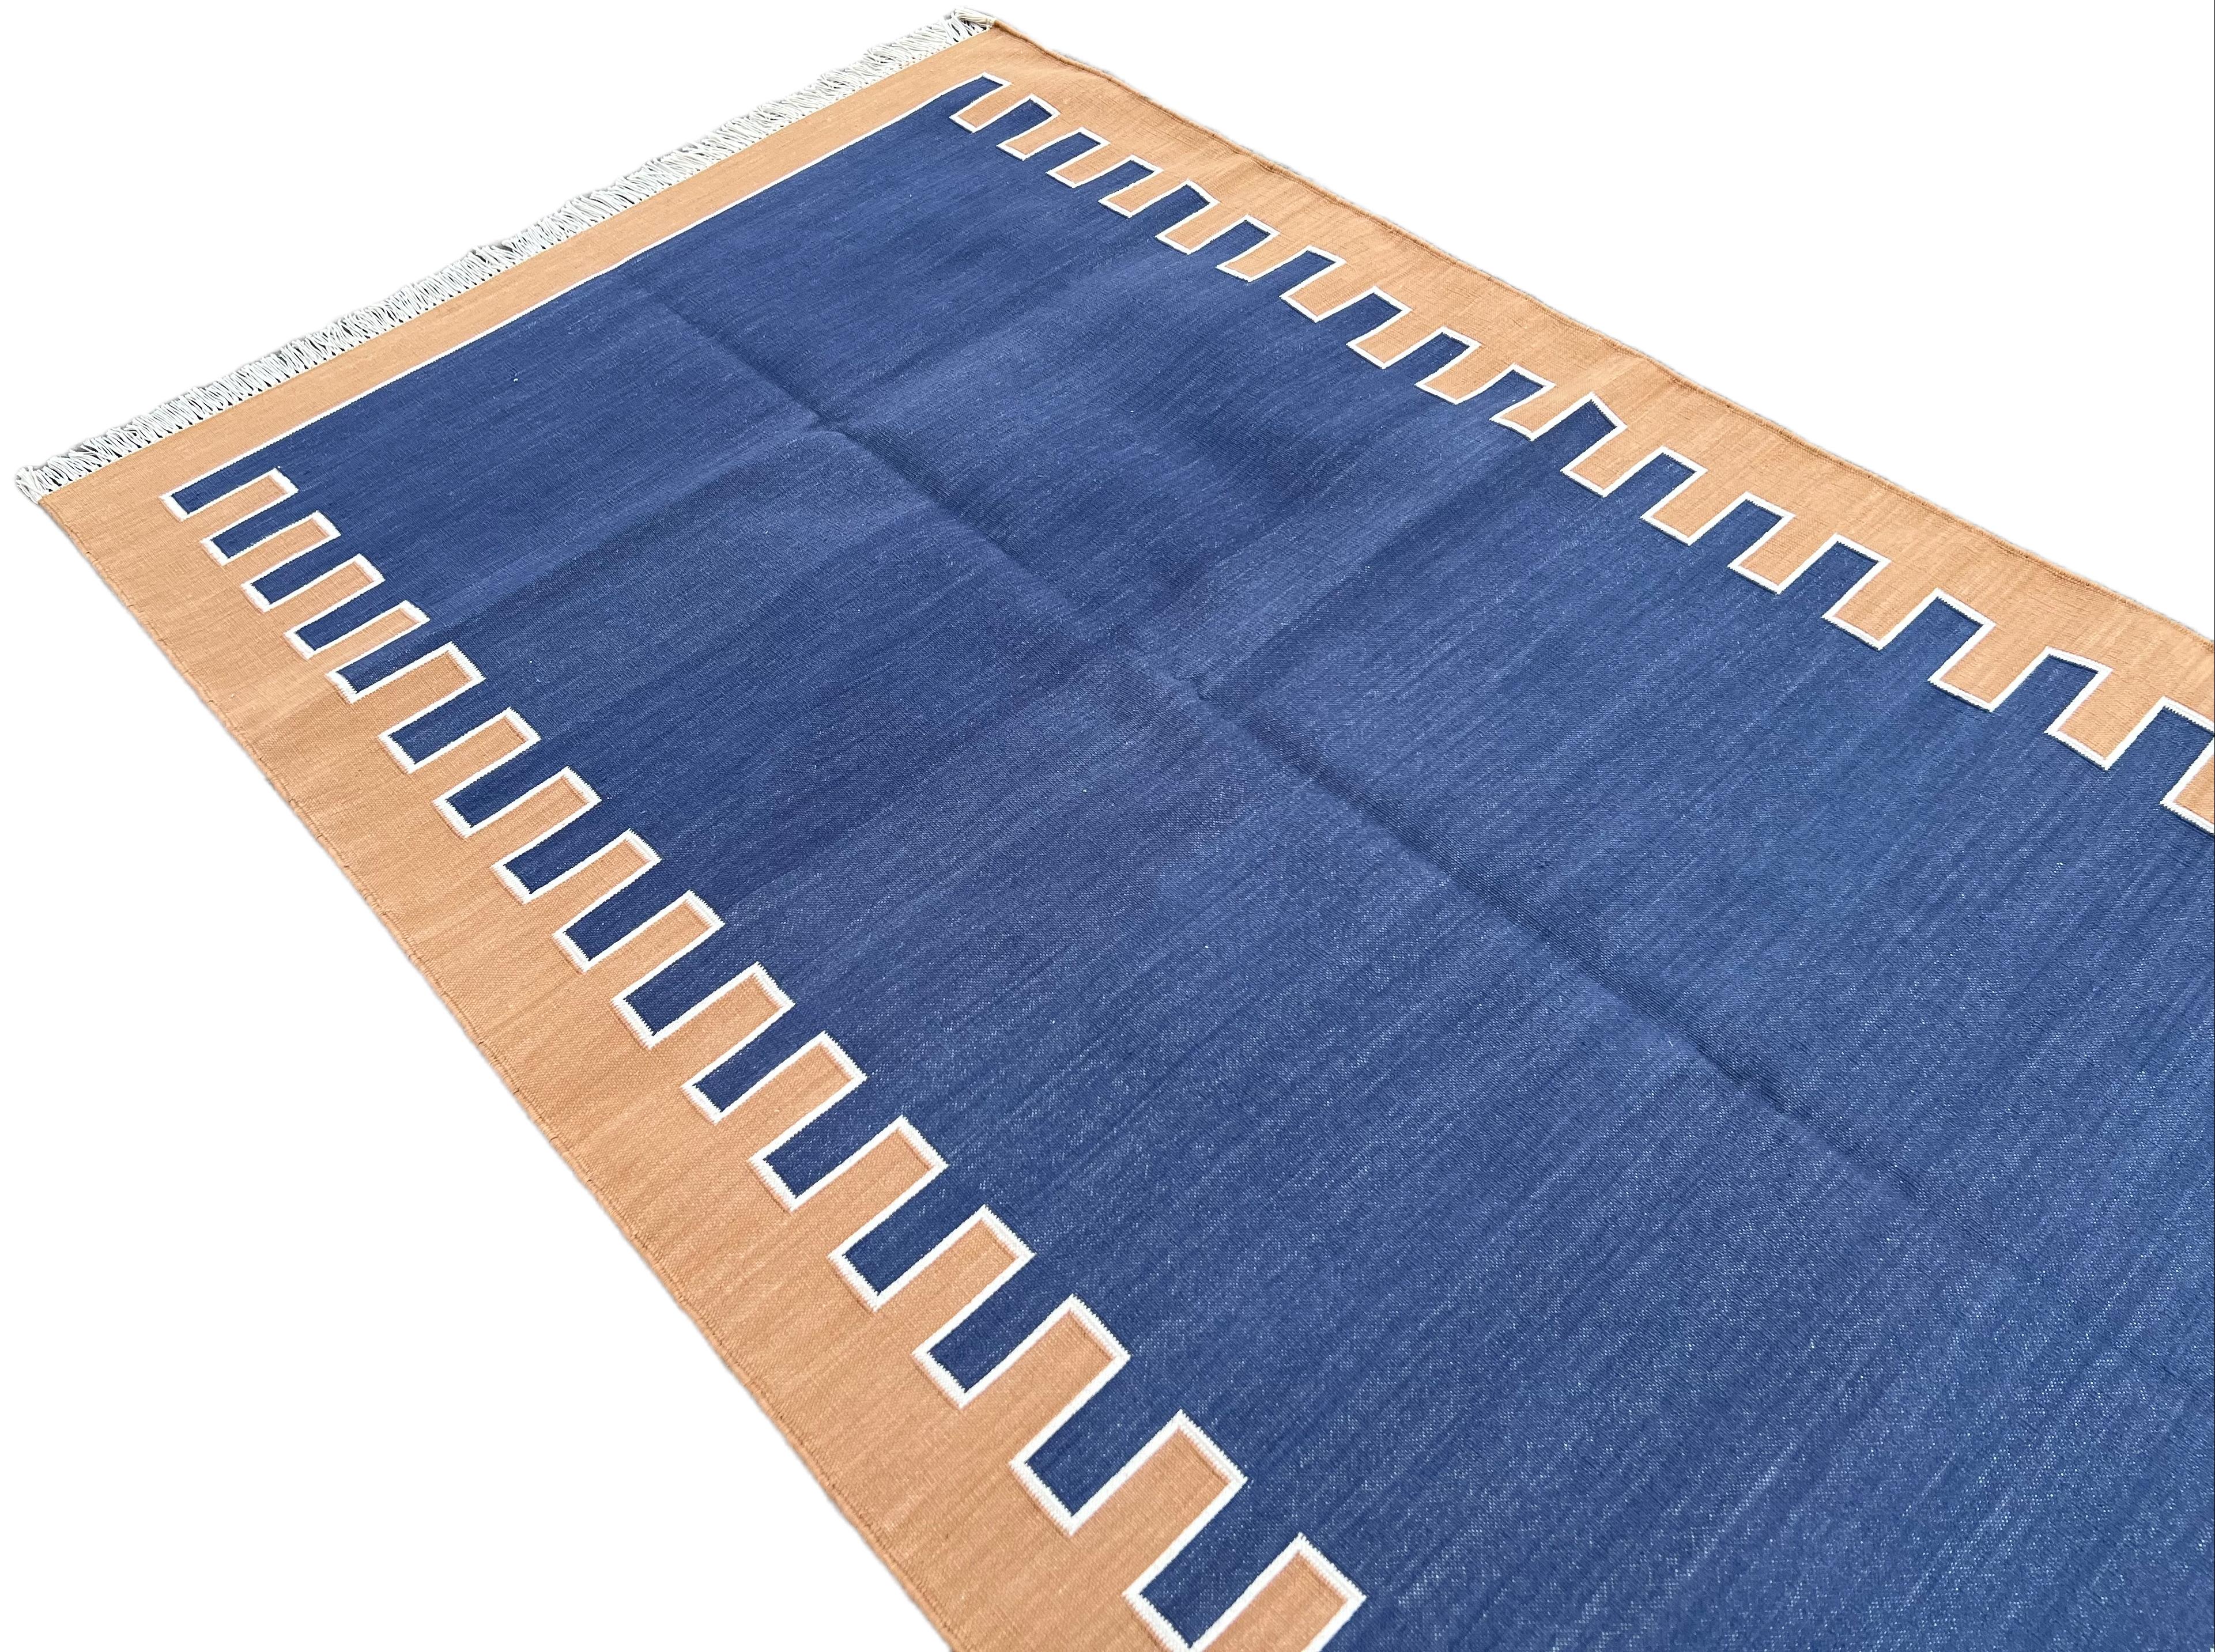 Contemporary Handmade Cotton Area Flat Weave Rug, 3x5 Blue And Tan Zig Zag Striped Dhurrie For Sale